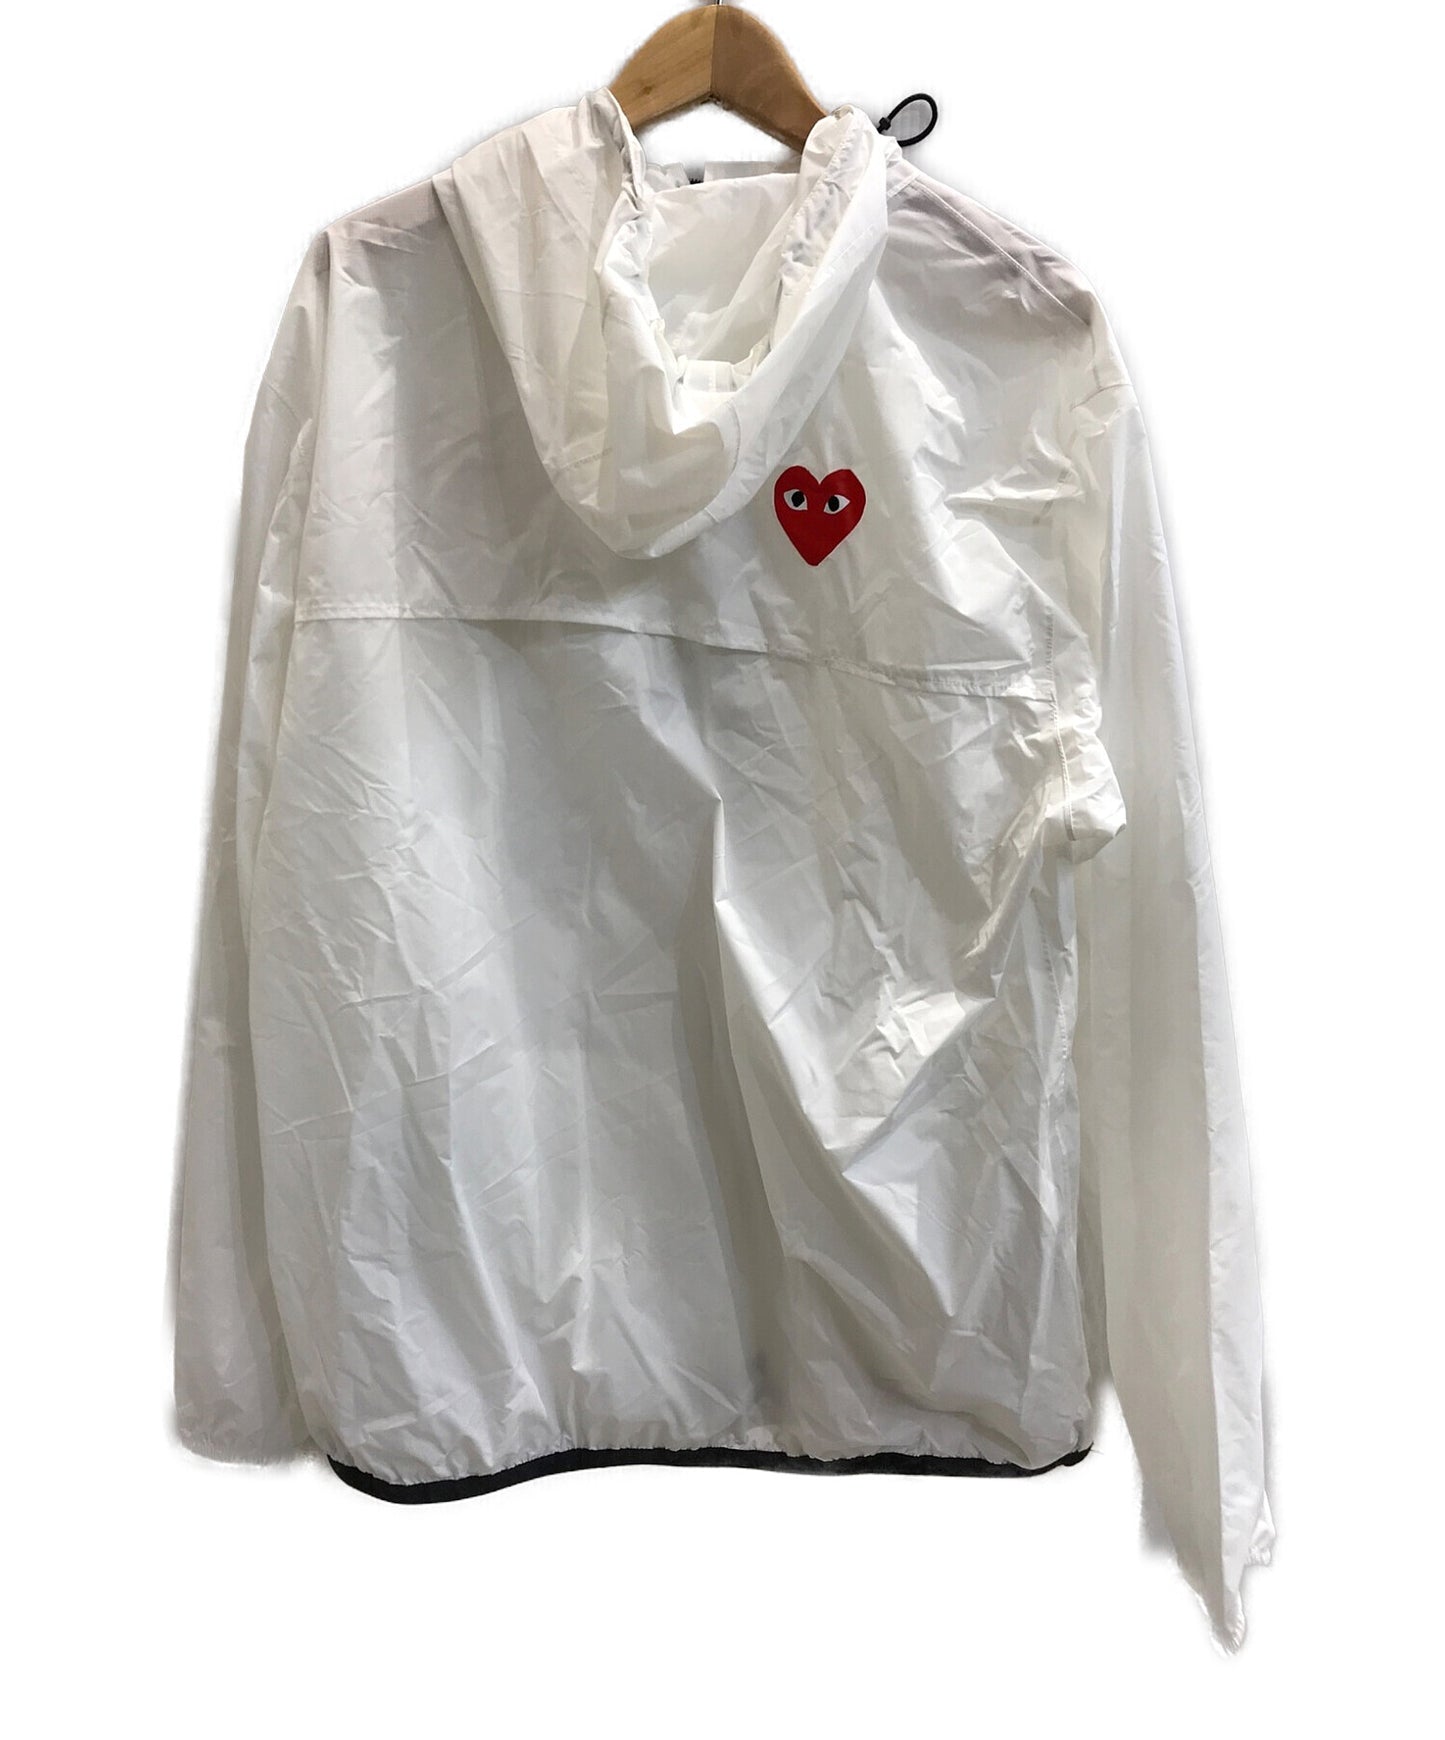 [Pre-owned] PLAY COMME des GARCONS x K-WAY Nylon Jacket / White K-Way Edition Nylon Jacket 221246m180002